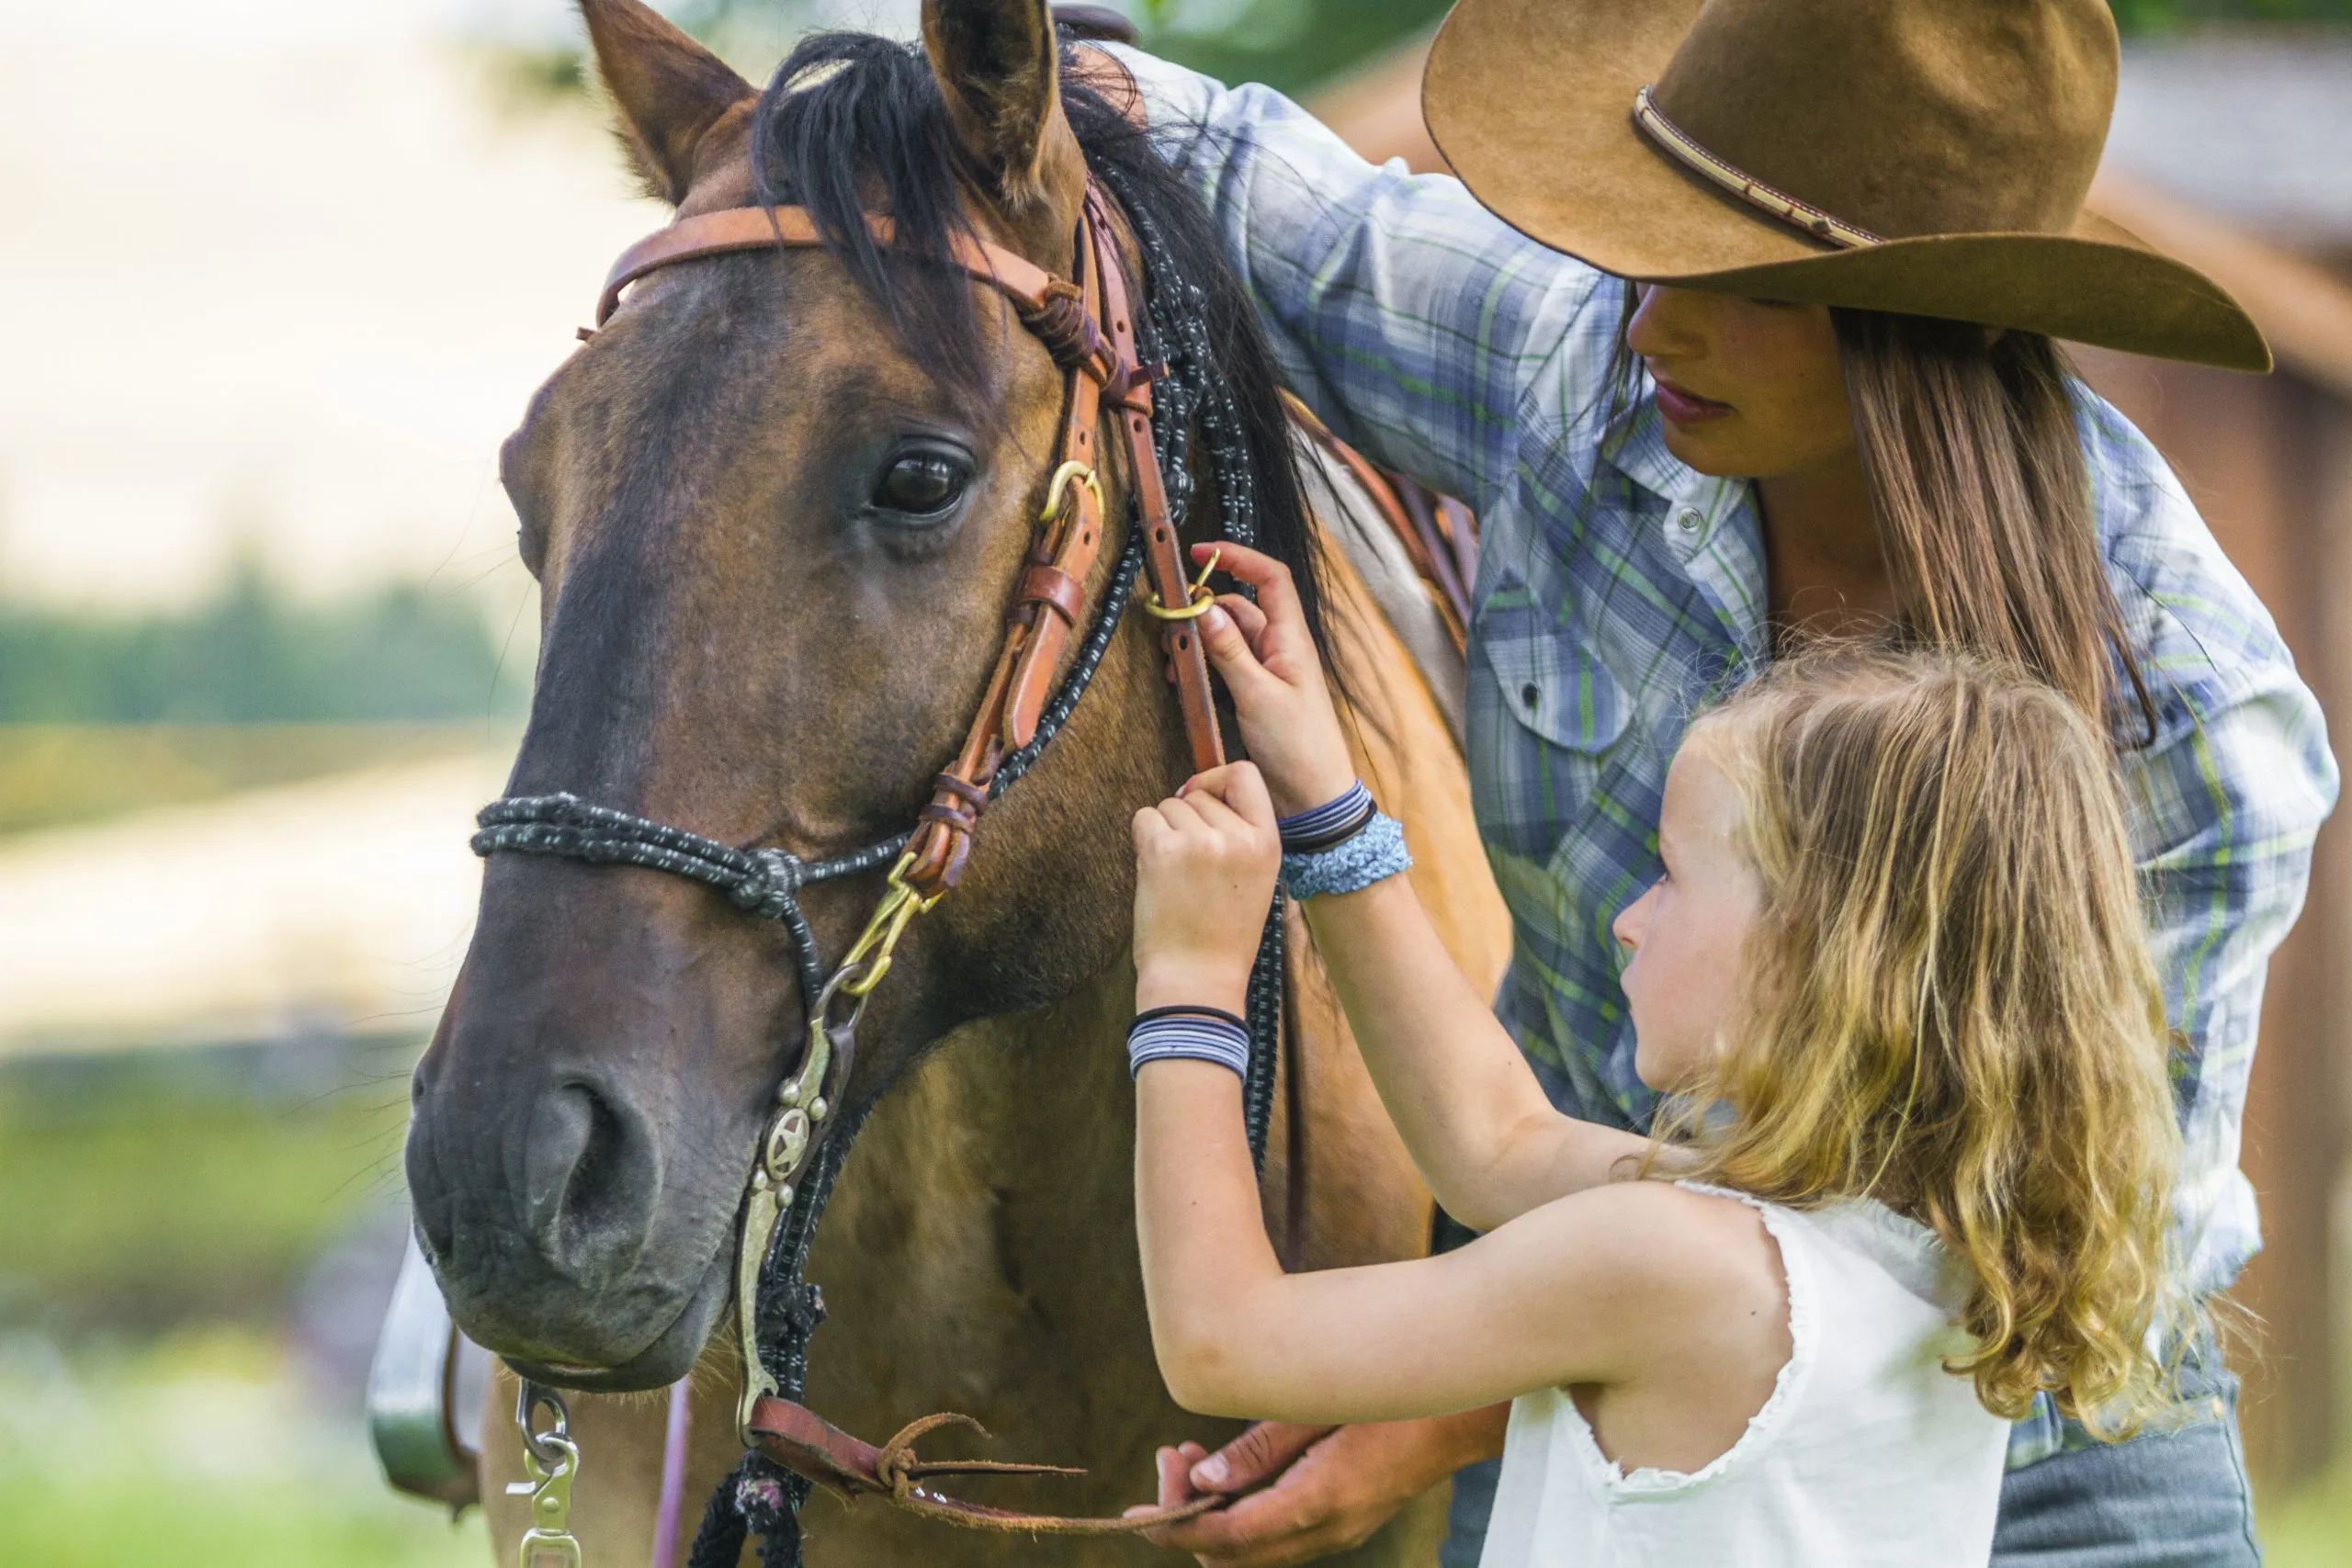 A wrangler teaching a child how to tend to a horse